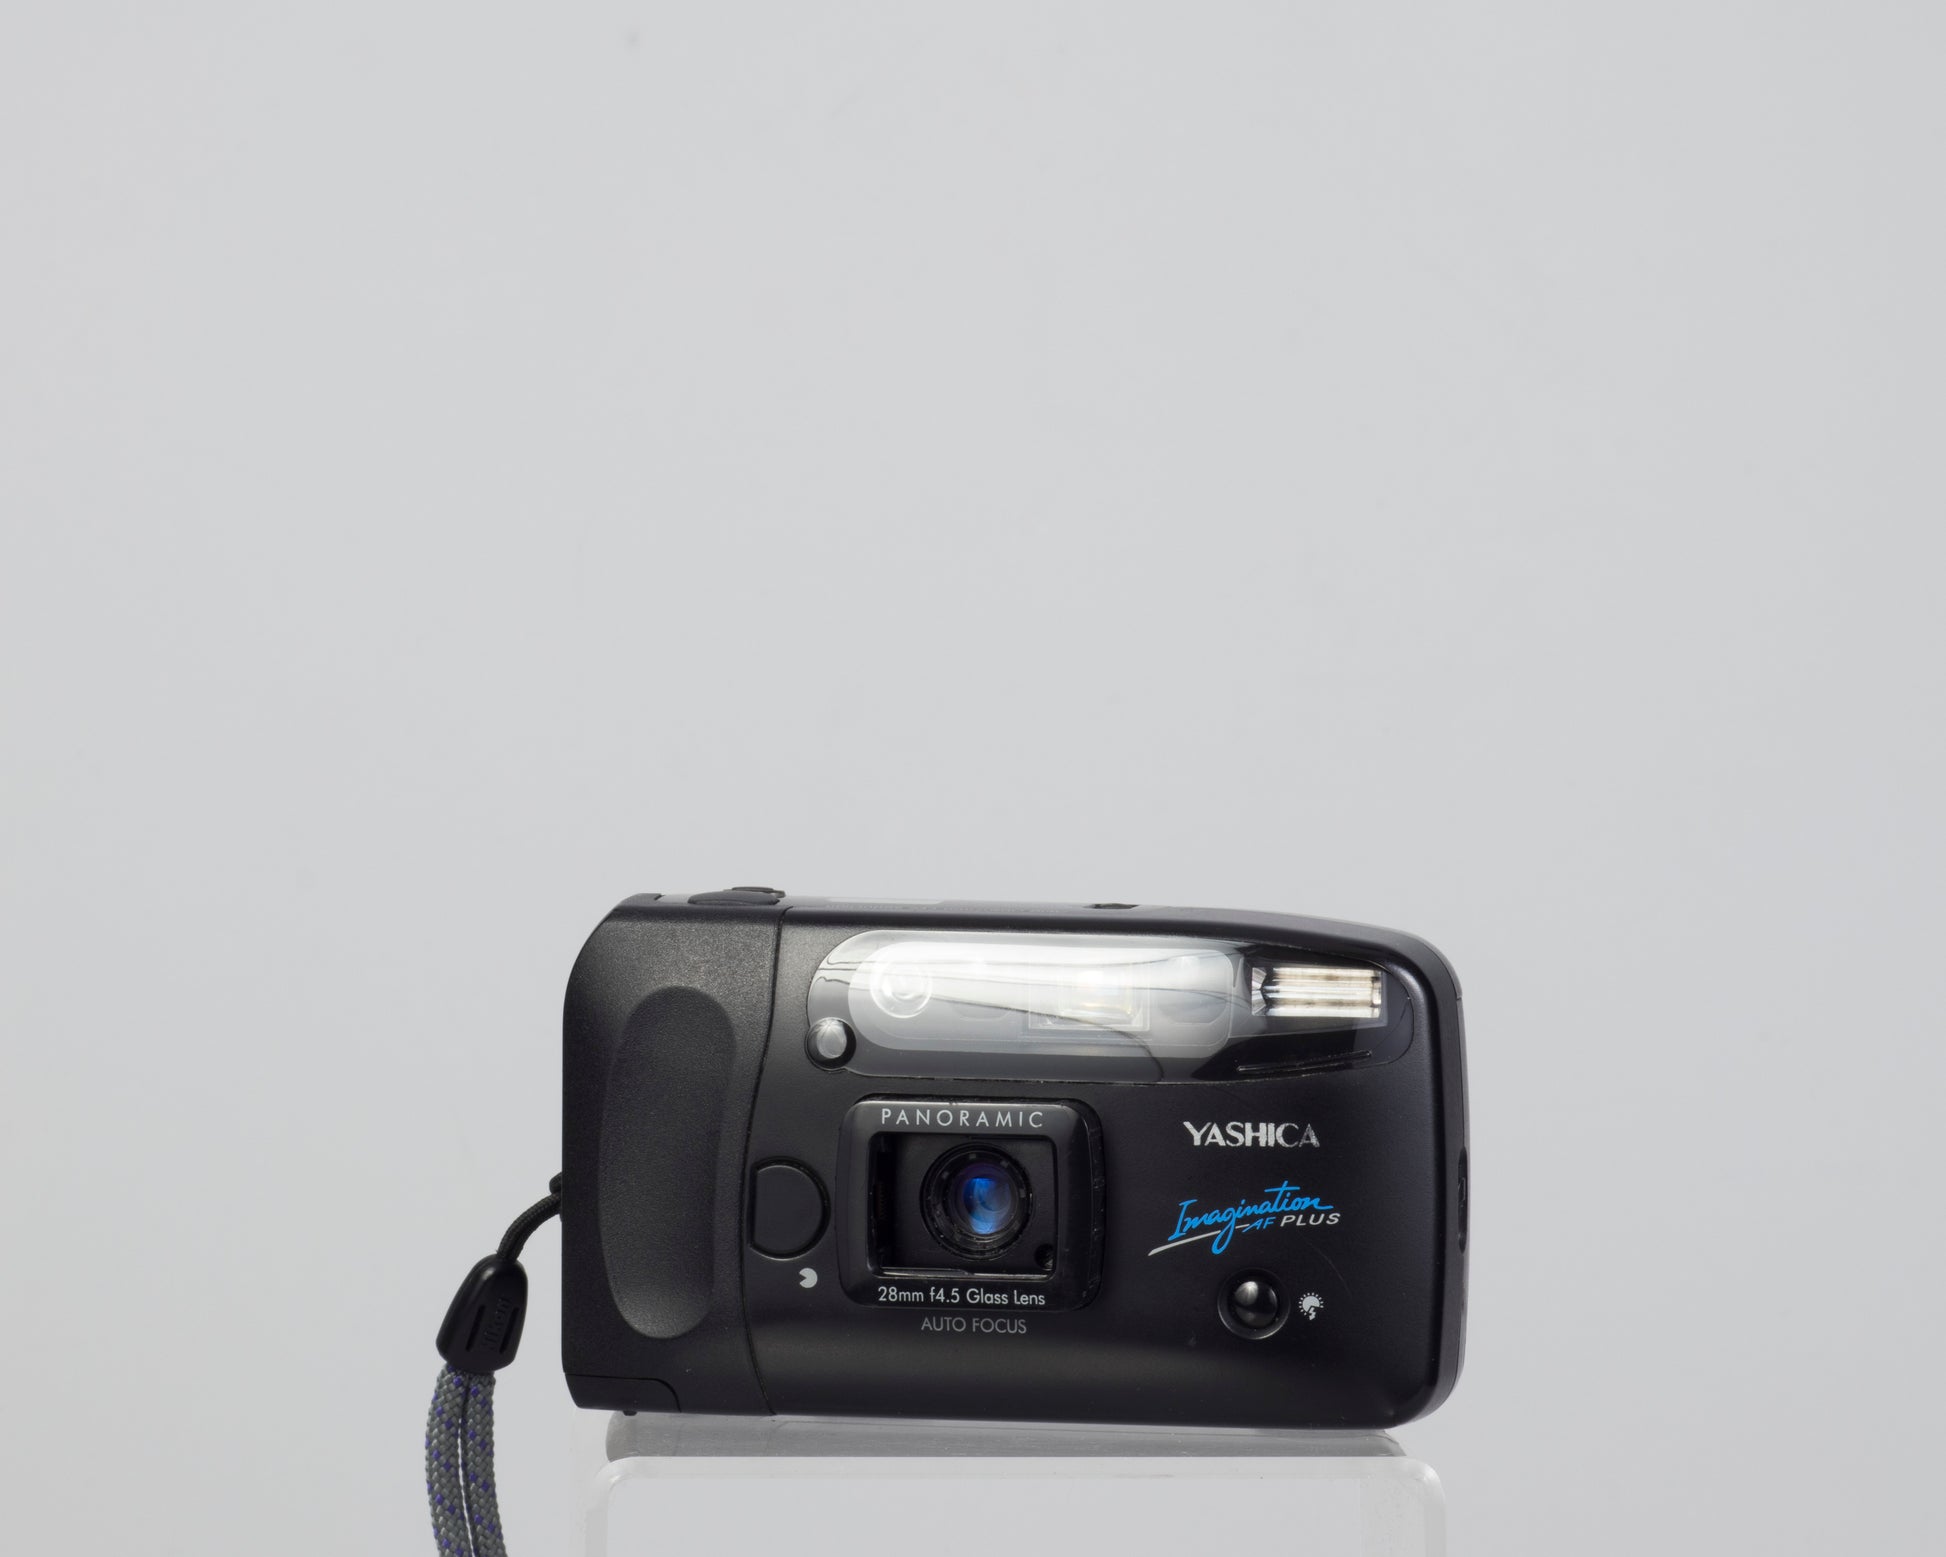 The Yashica Imagination AF Plus compact 35mm film camera